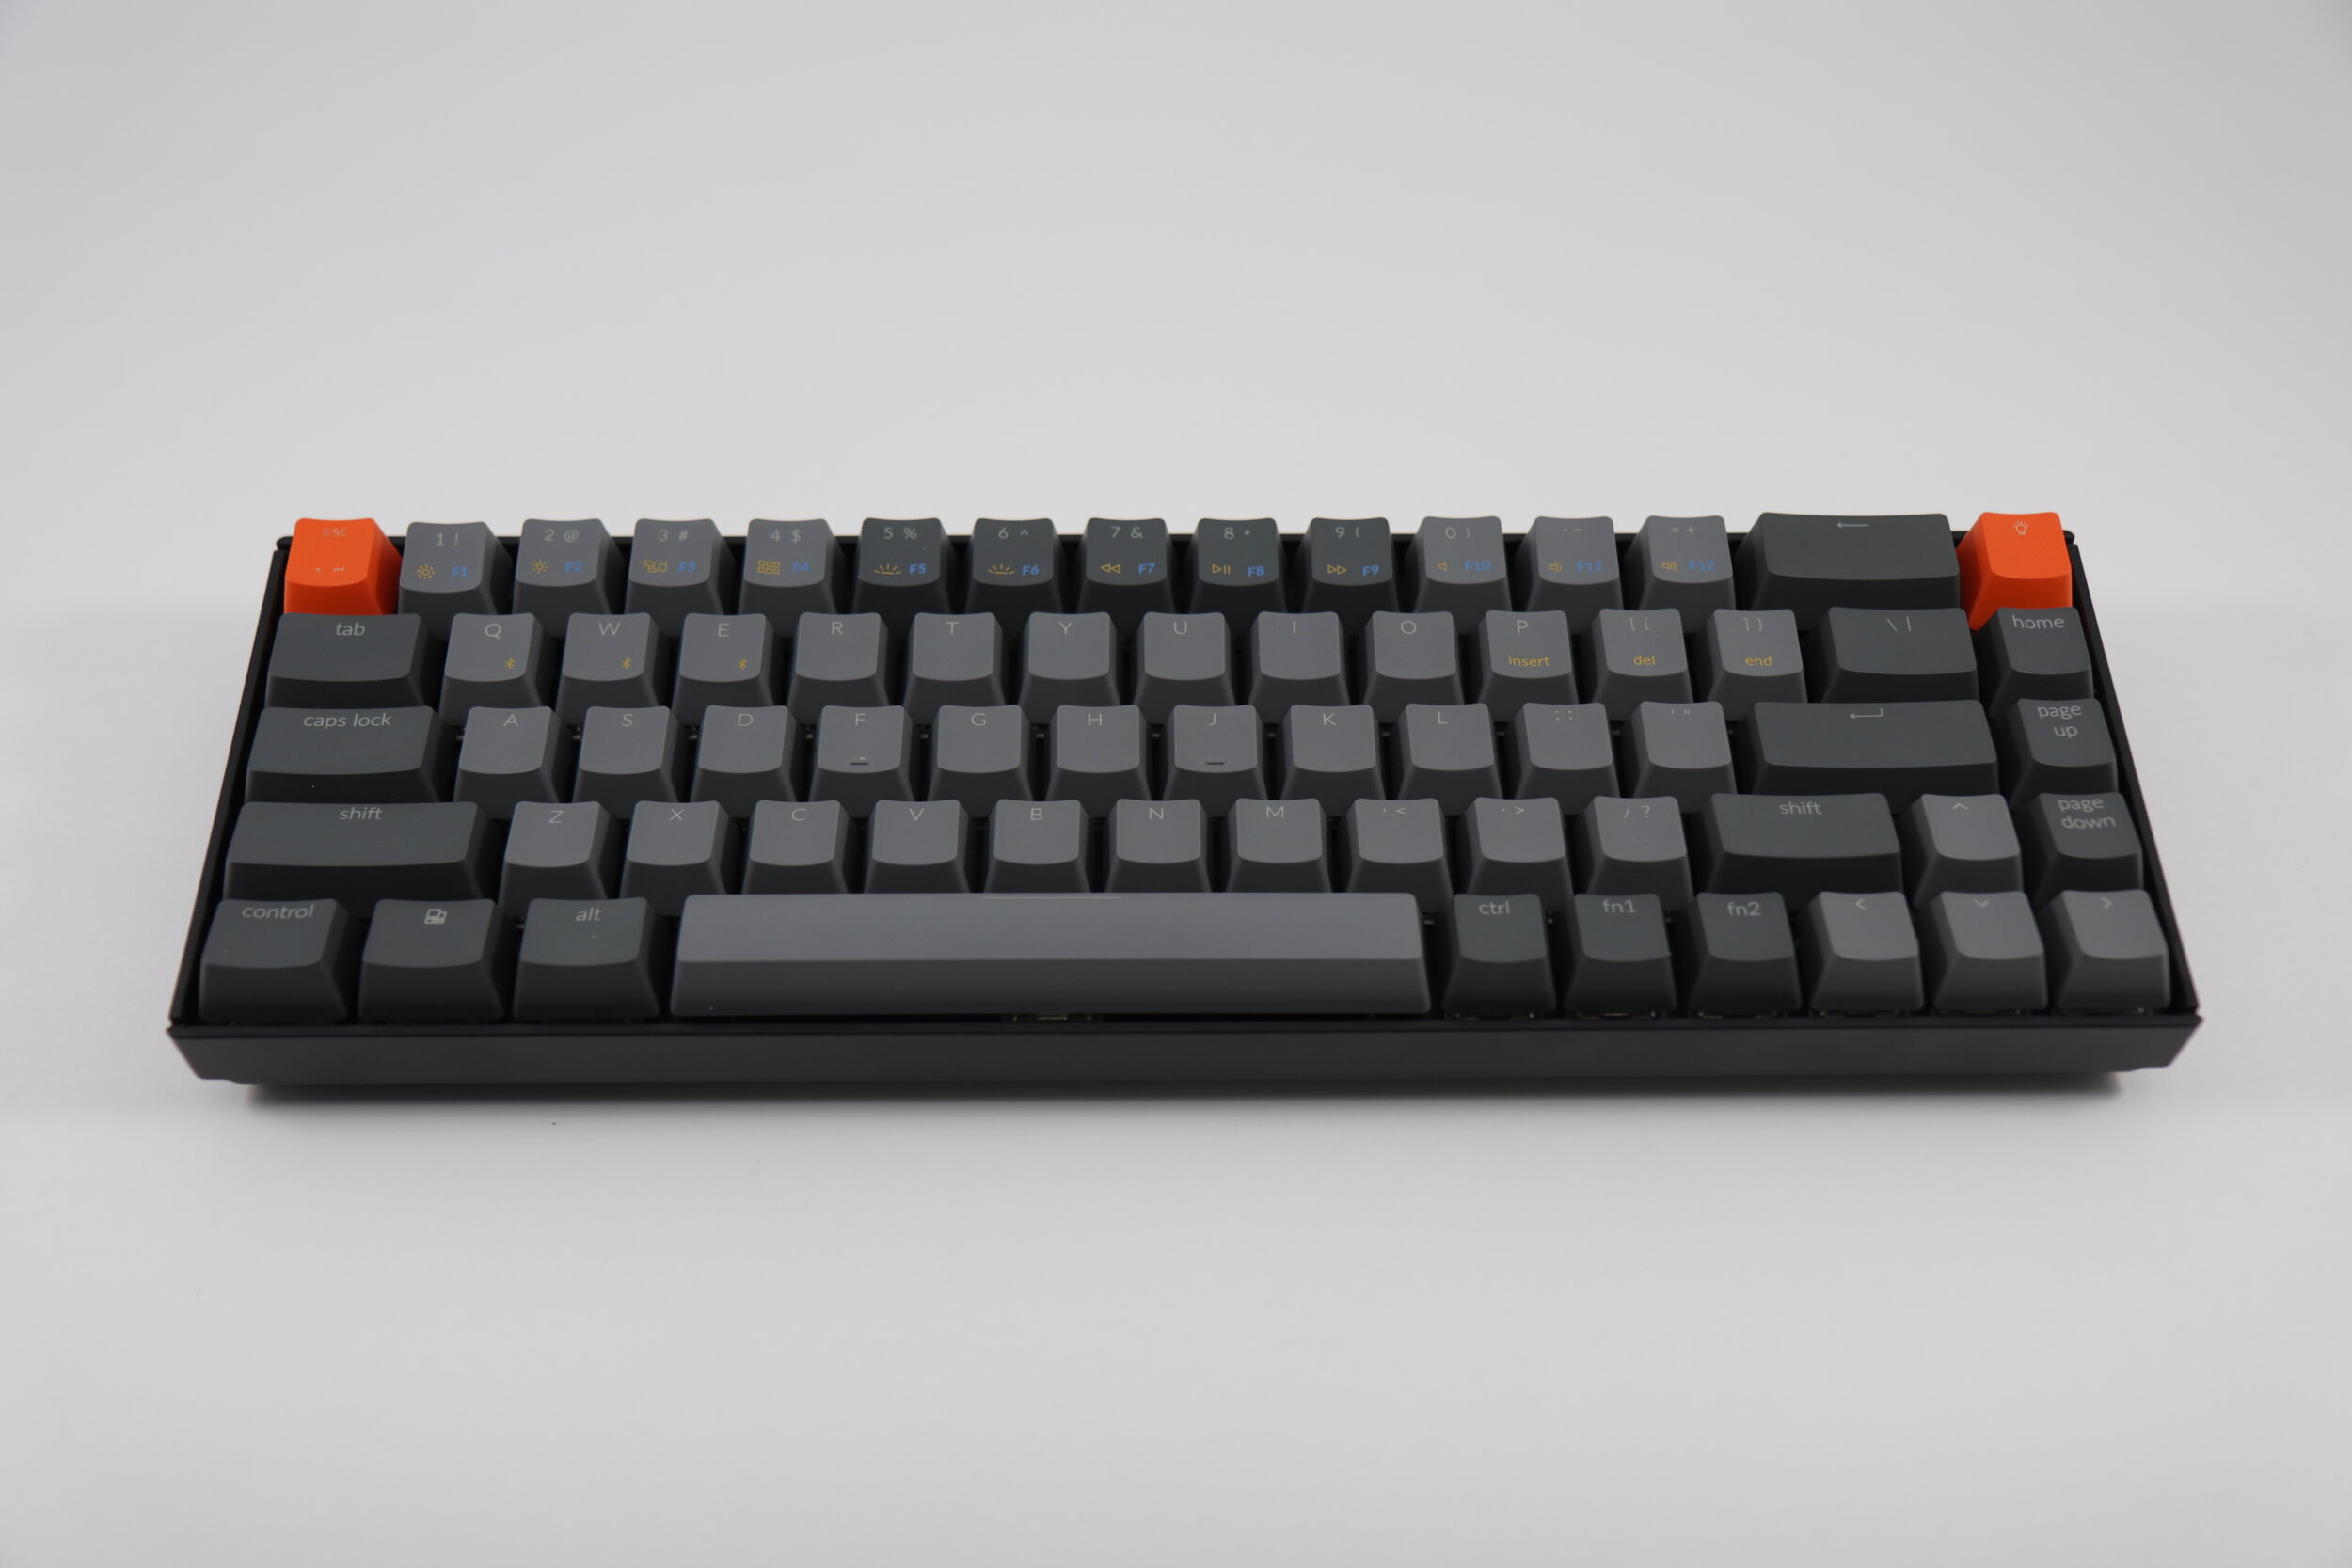 Keychron K6 - A Solid Choice for a 65% Wireless Mechanical